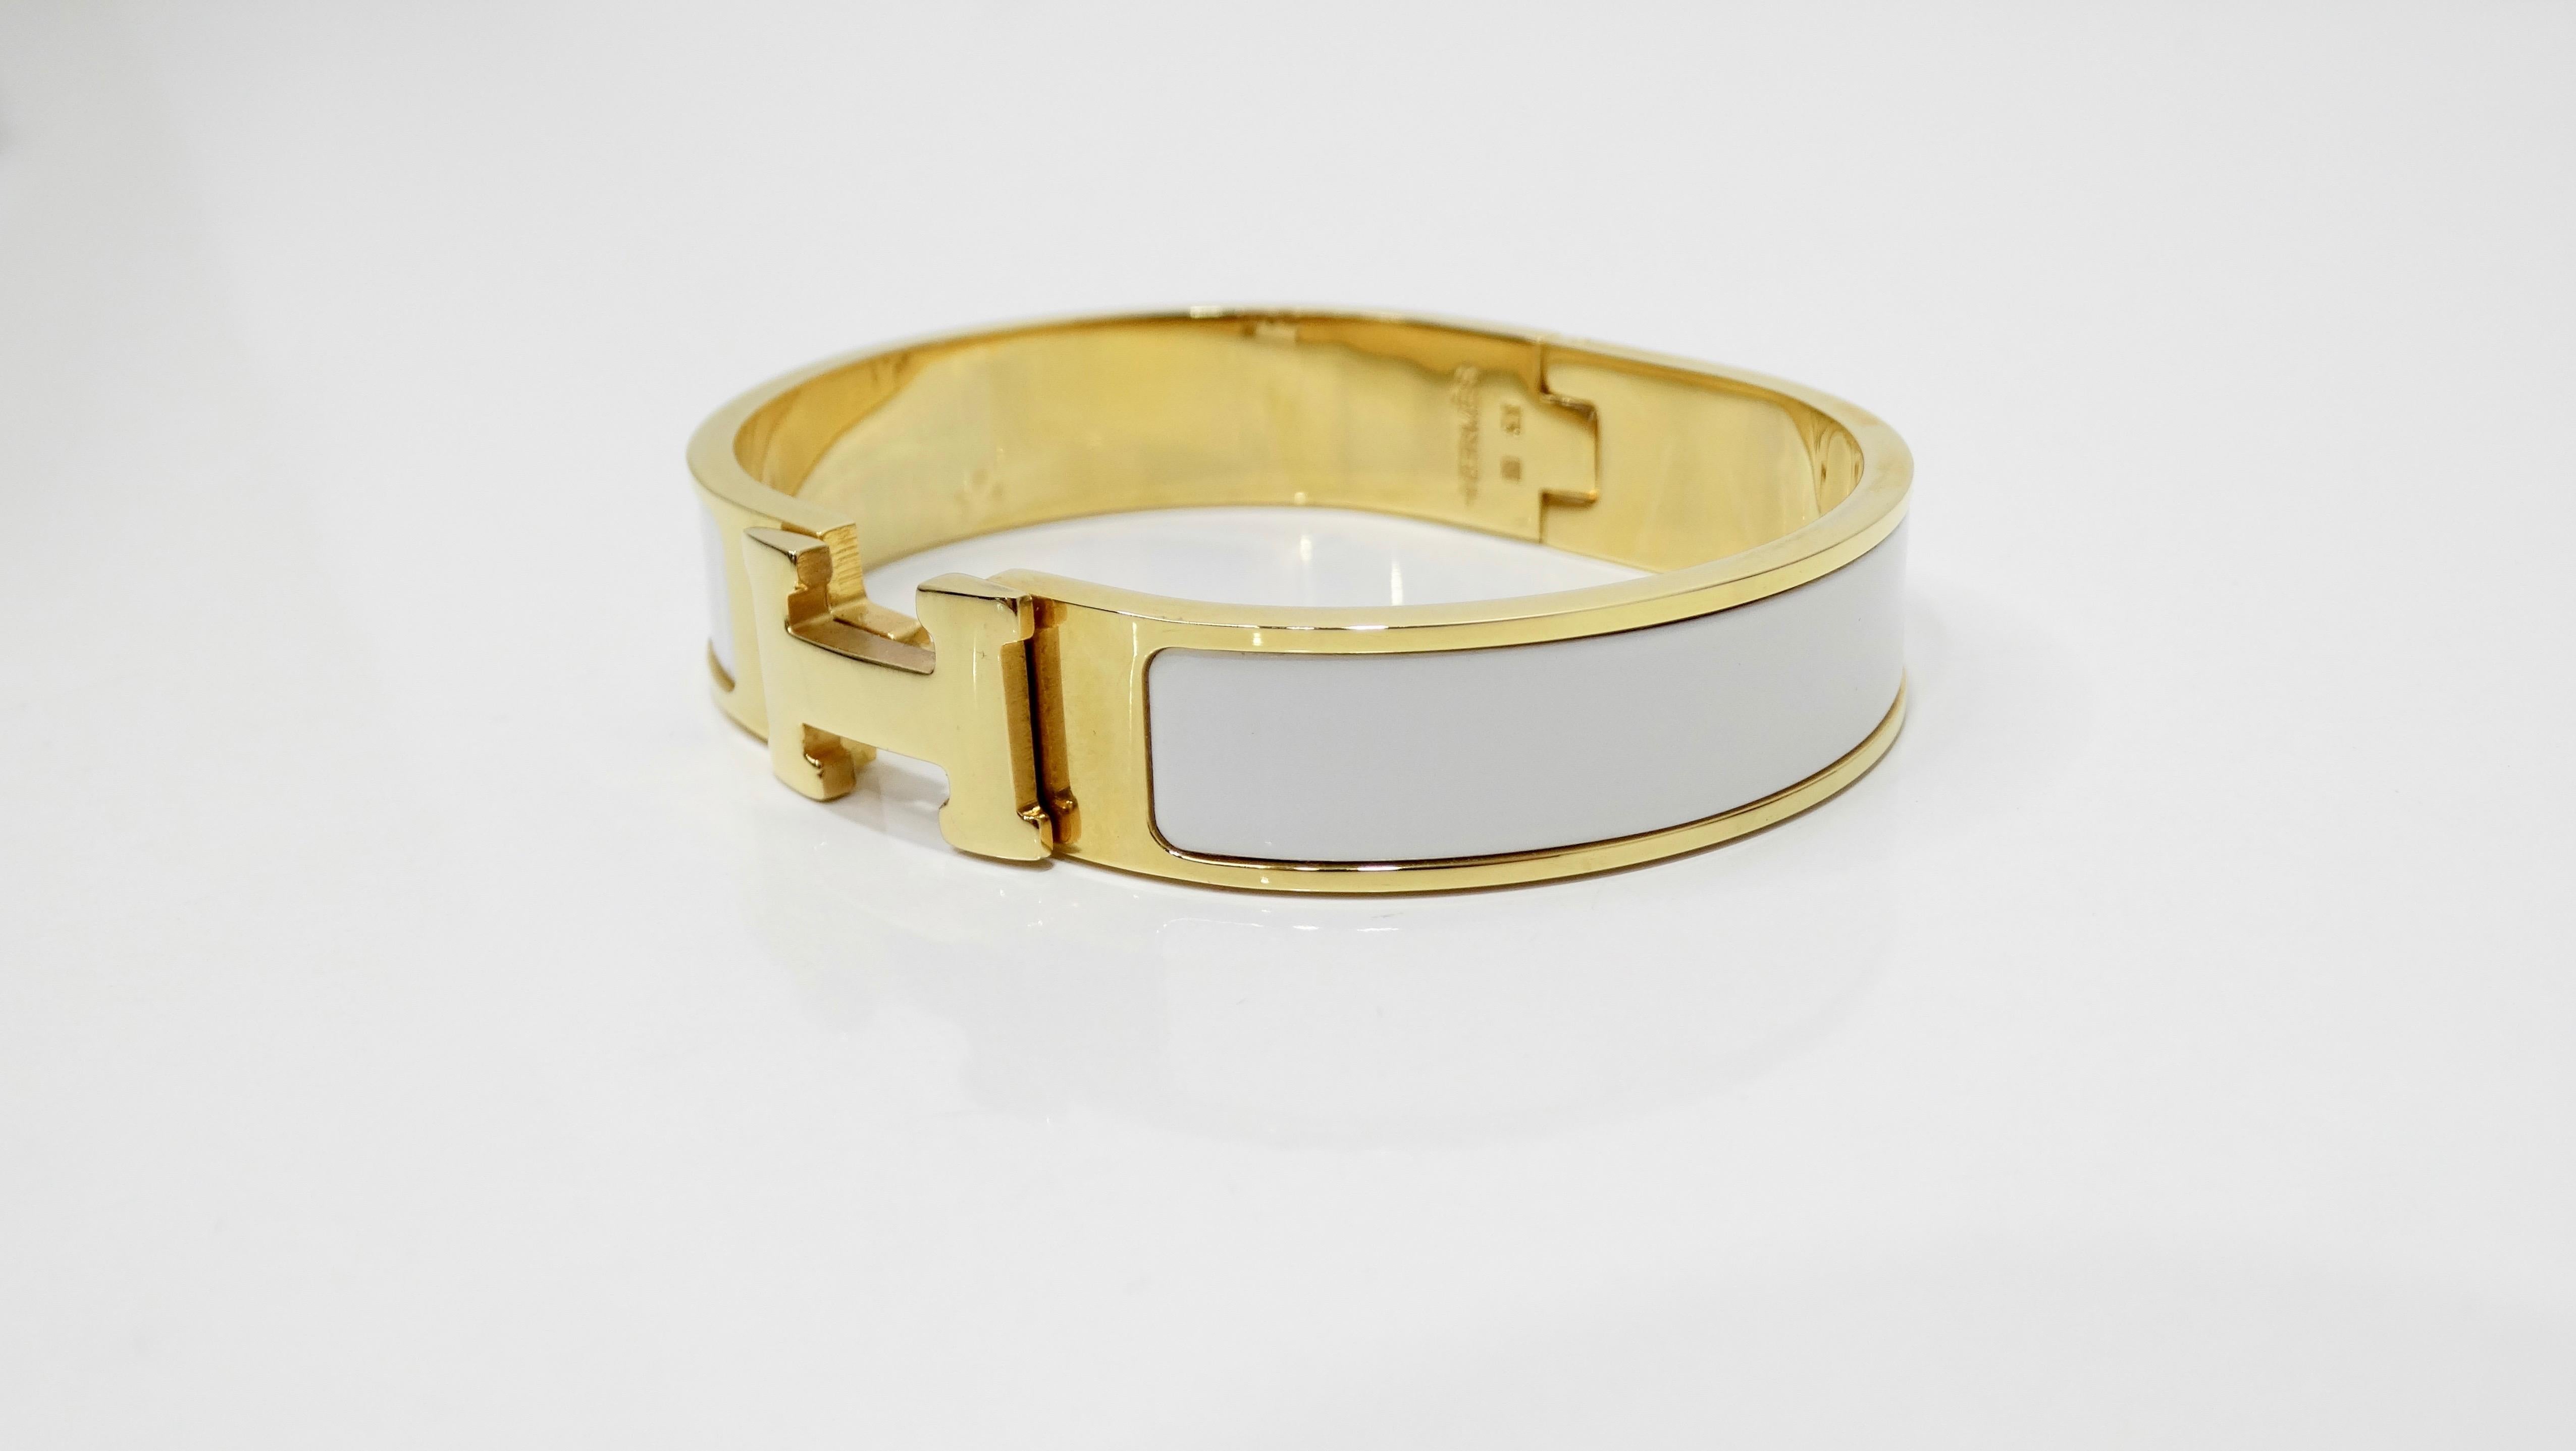 Add this classic Hermés bracelet to your collection! Circa 2013 and one of Hermés most popular accessories, this clic-clac H bracelet features gold-plated palladium hardware, white enamel exterior, and an 